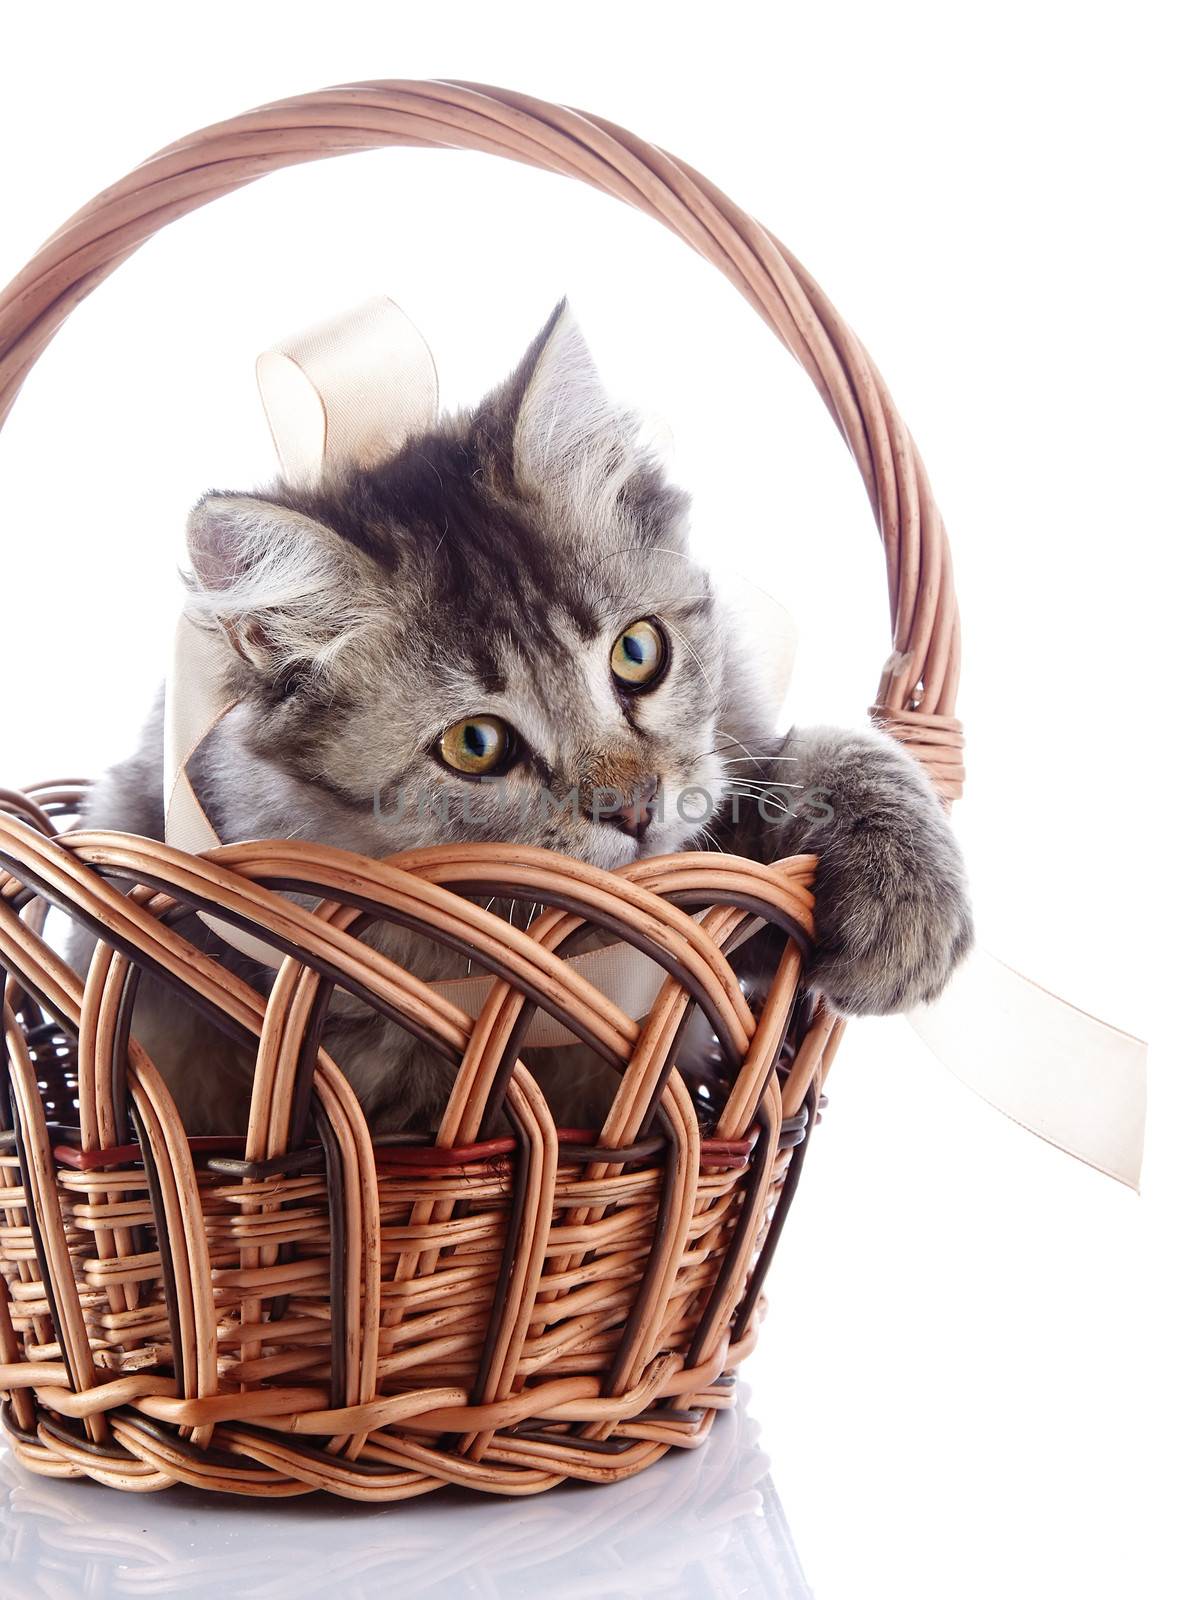 Cat in a wattled basket plays with a tape. by Azaliya